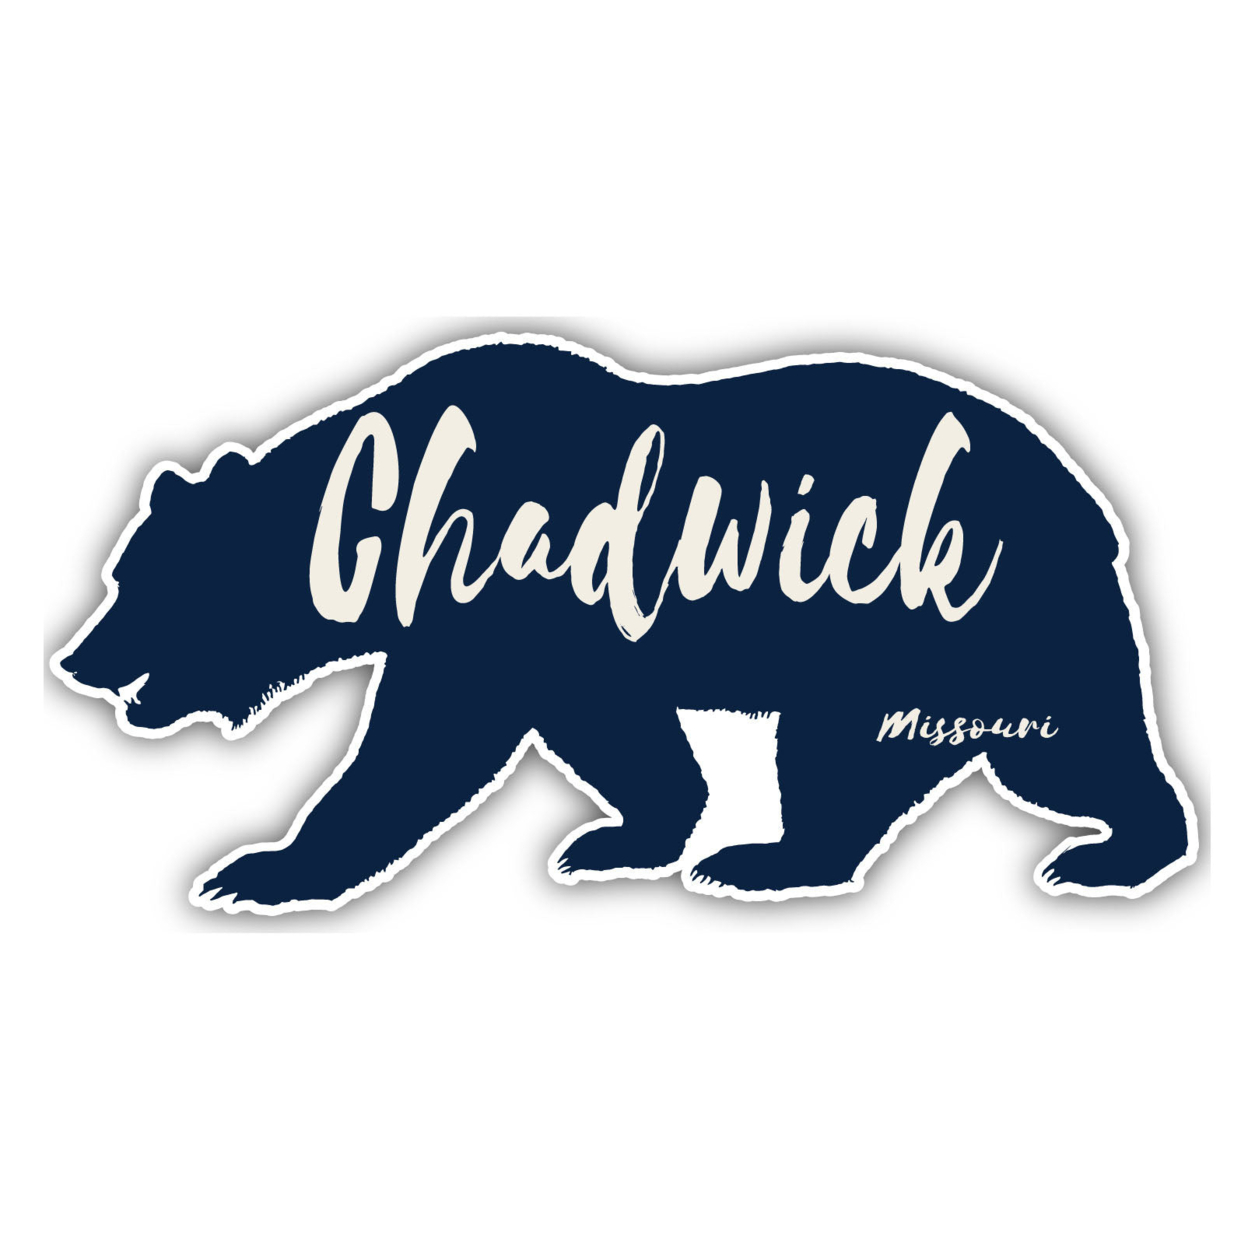 Chadwick Missouri Souvenir Decorative Stickers (Choose Theme And Size) - 4-Pack, 6-Inch, Adventures Awaits